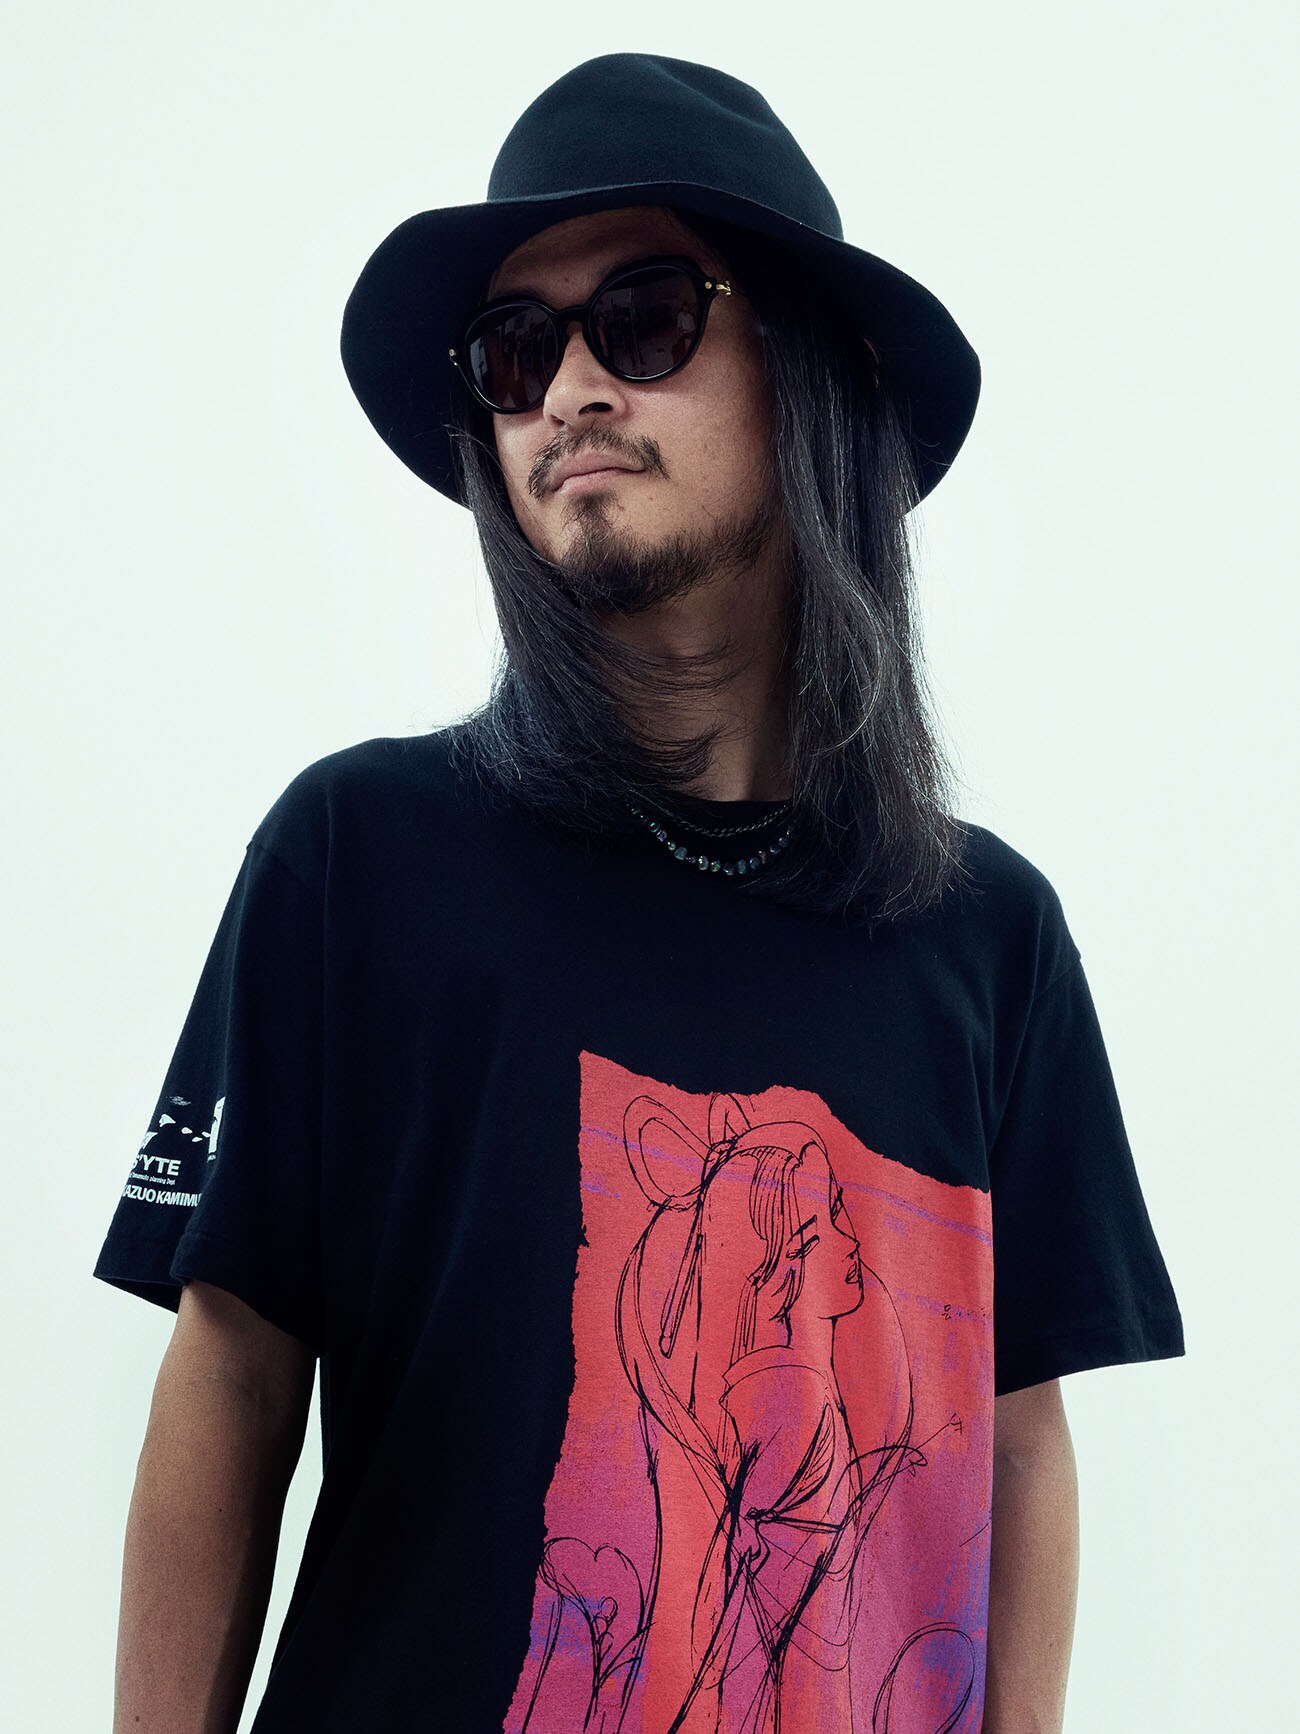 S'YTE x KAZUO KAMIMURA - COTTON JERSEY T-SHIRT WITH PRINTED 